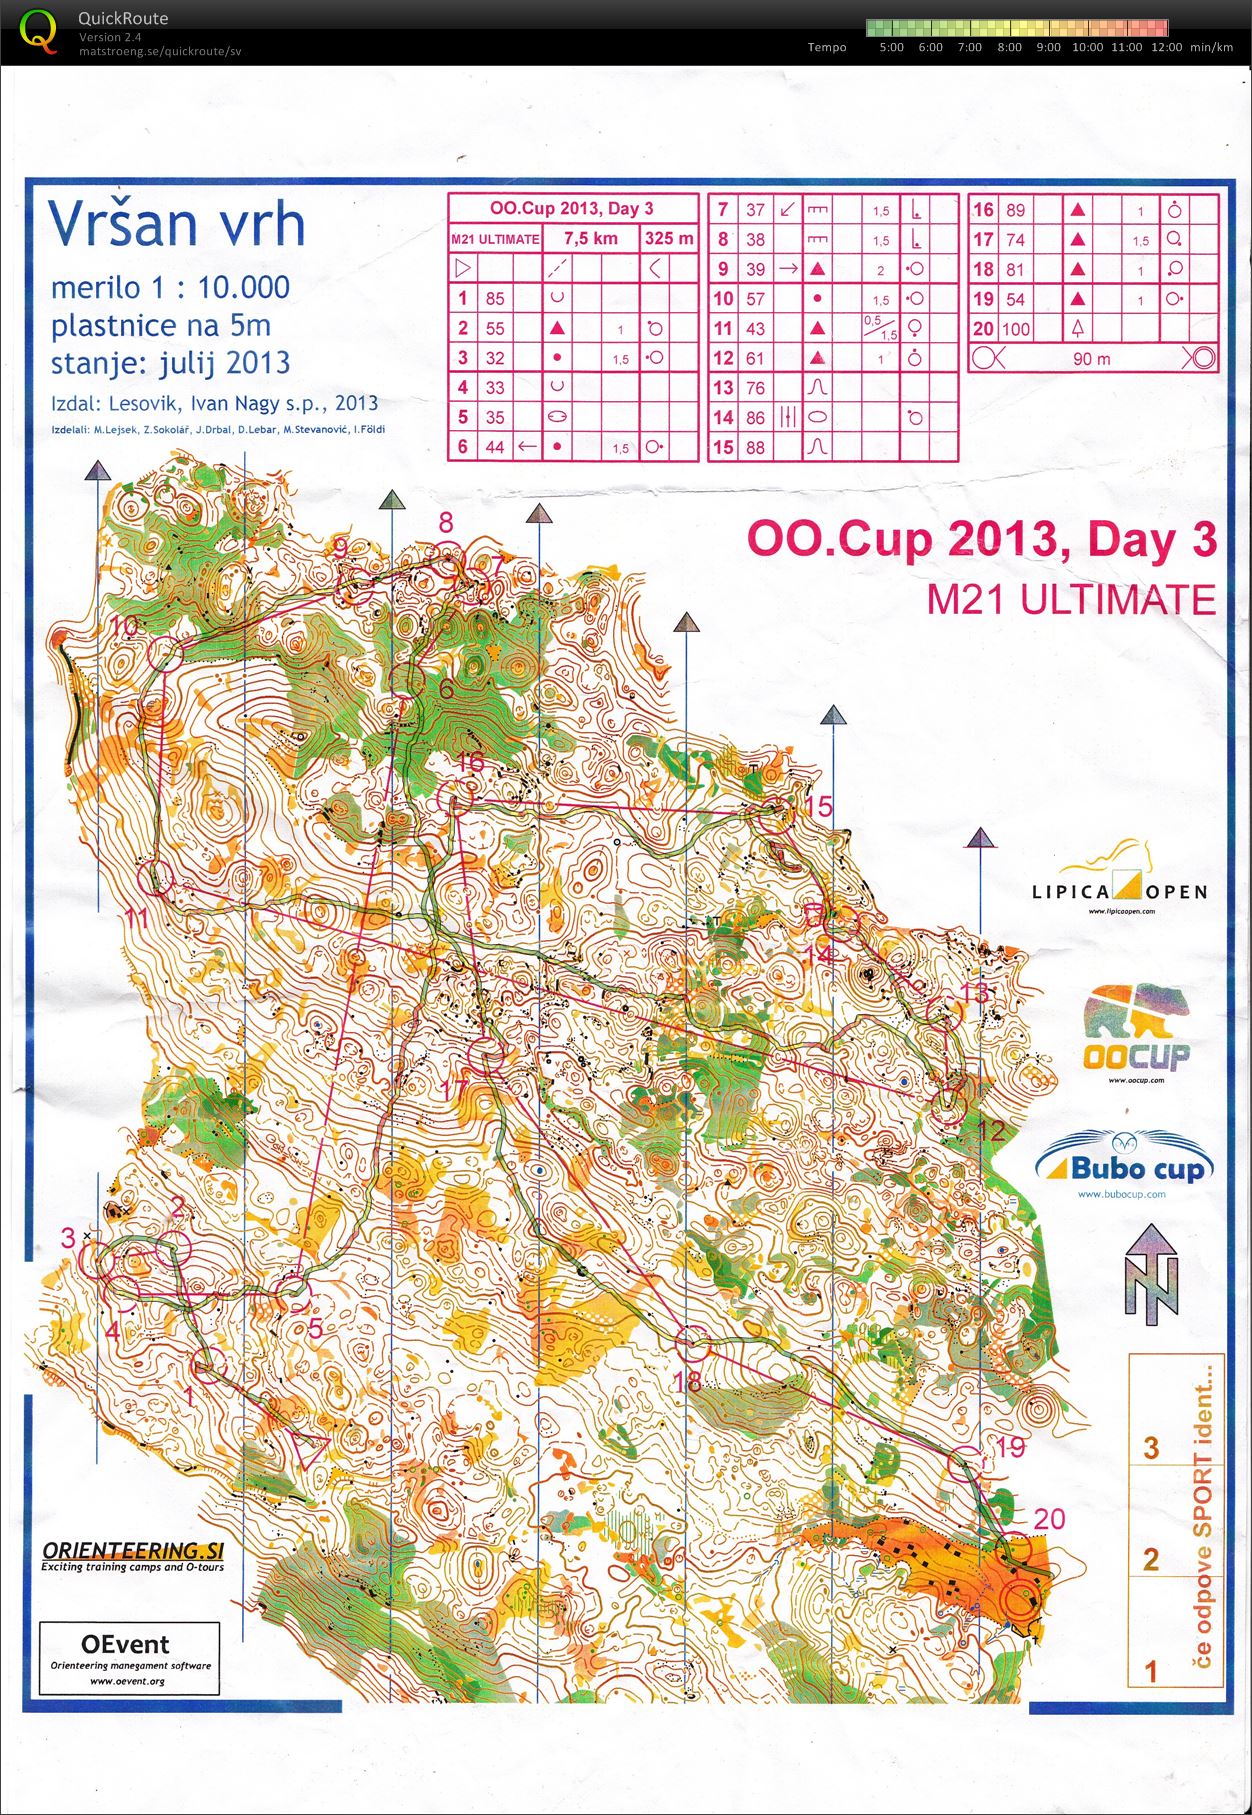 OOCup day 3 (28.07.2013)